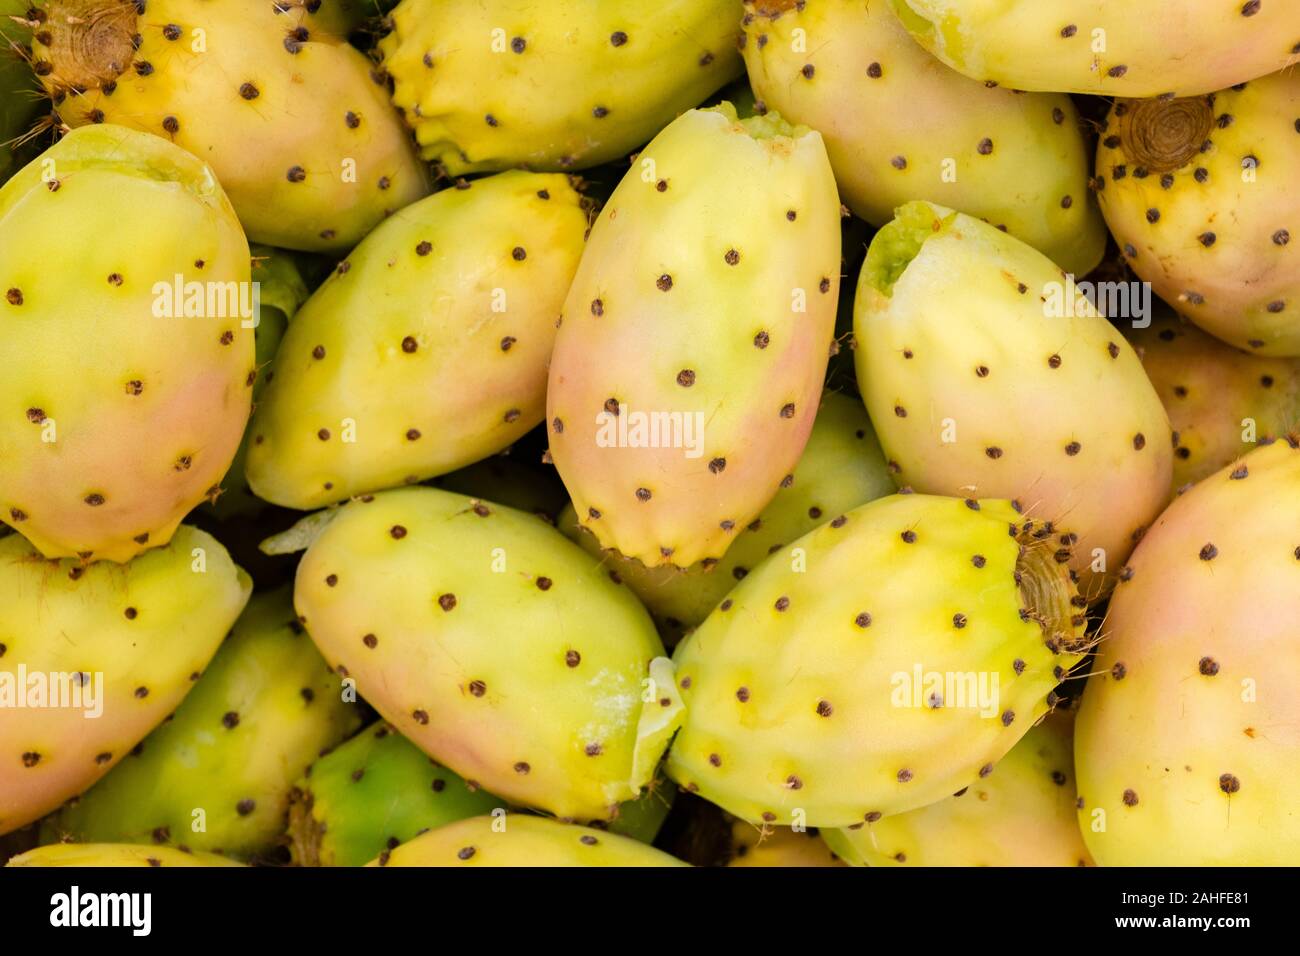 Close-up of prickly pear fruits on pad. Apulia region, Italy Stock Photo